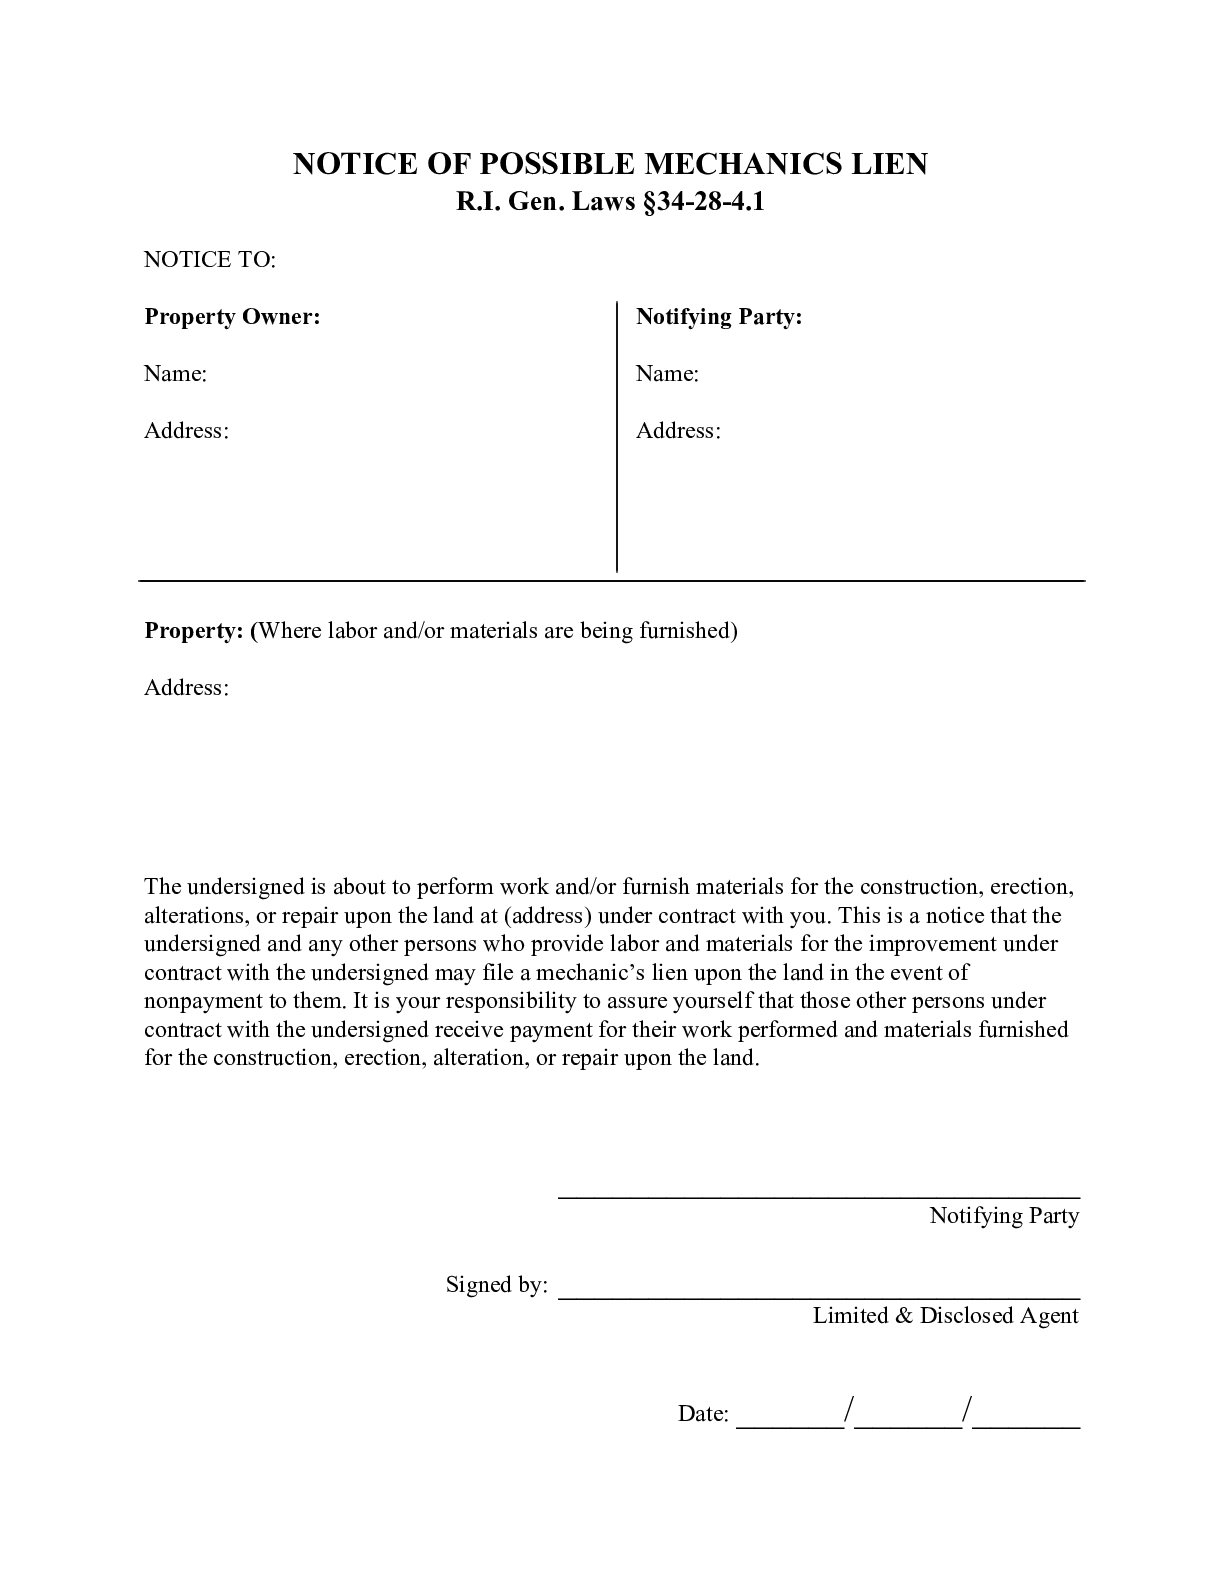 Rhode Island Notice of Possible Mechanics Lien – Form - free from